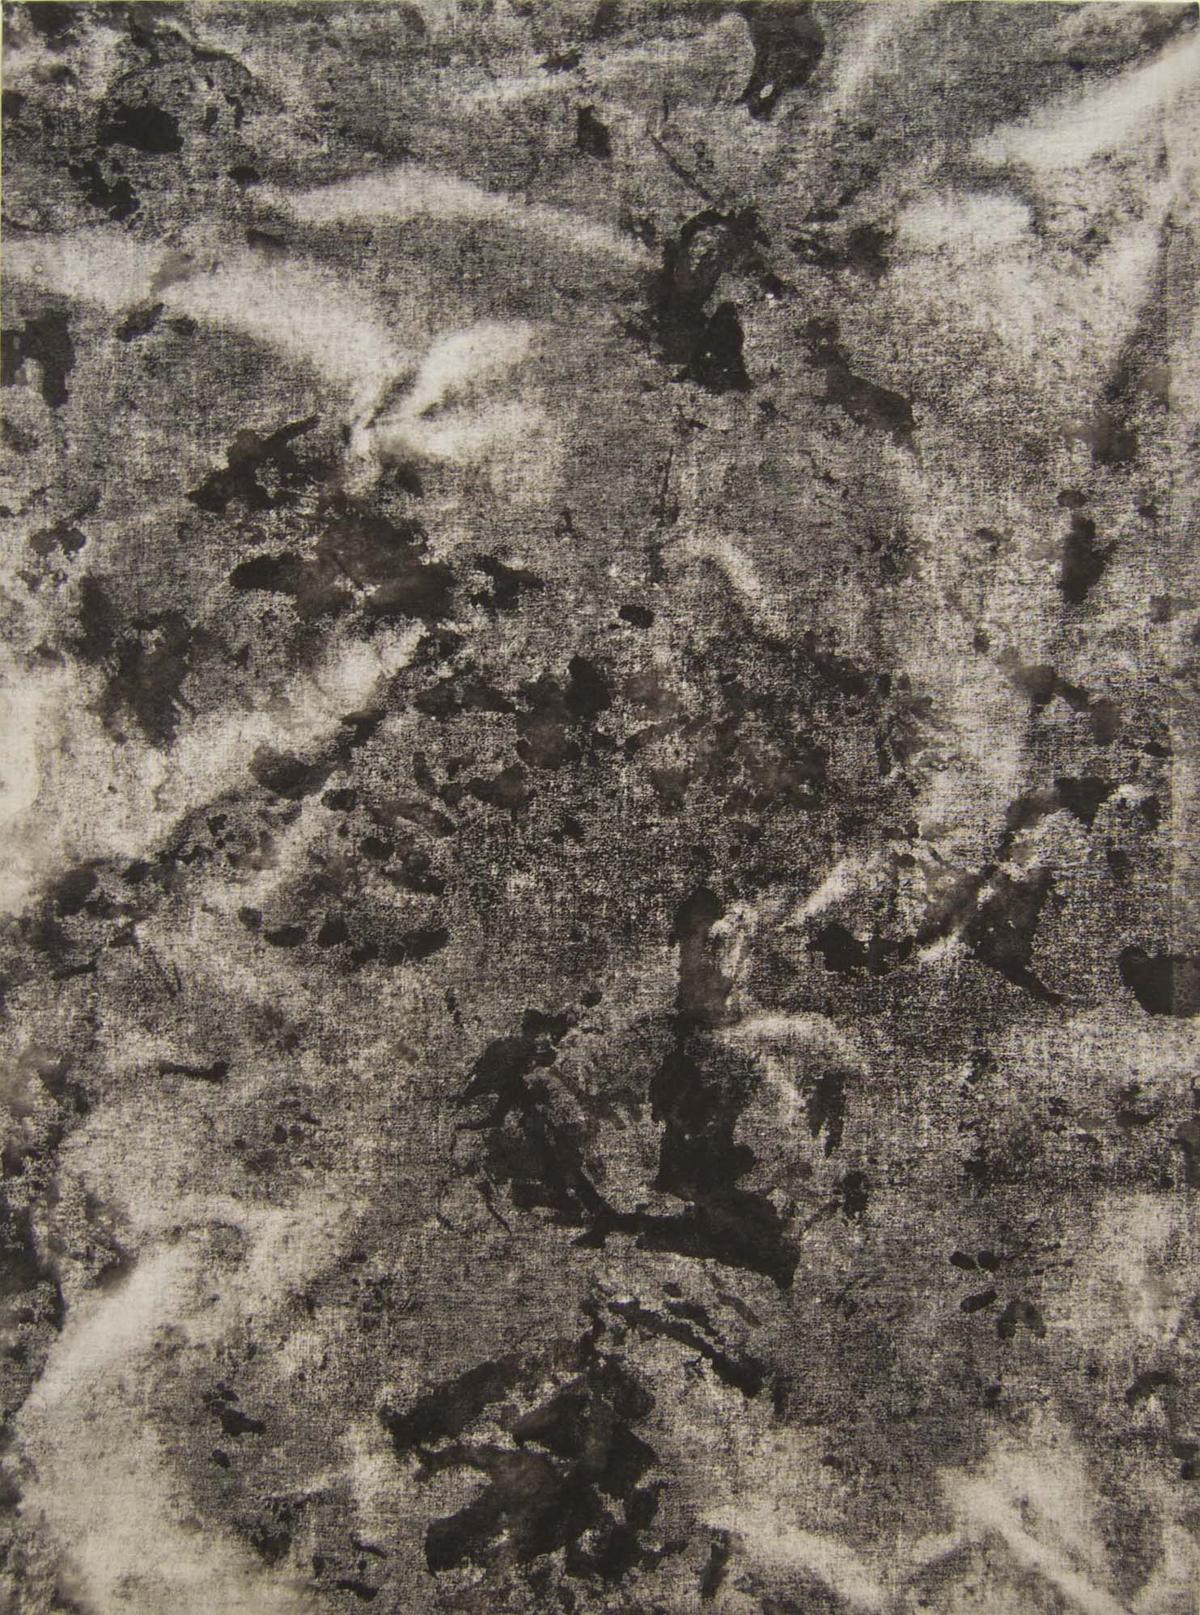 Imprint moulds created with the falling rain, carbon and ivory black pigments on cotton fabric